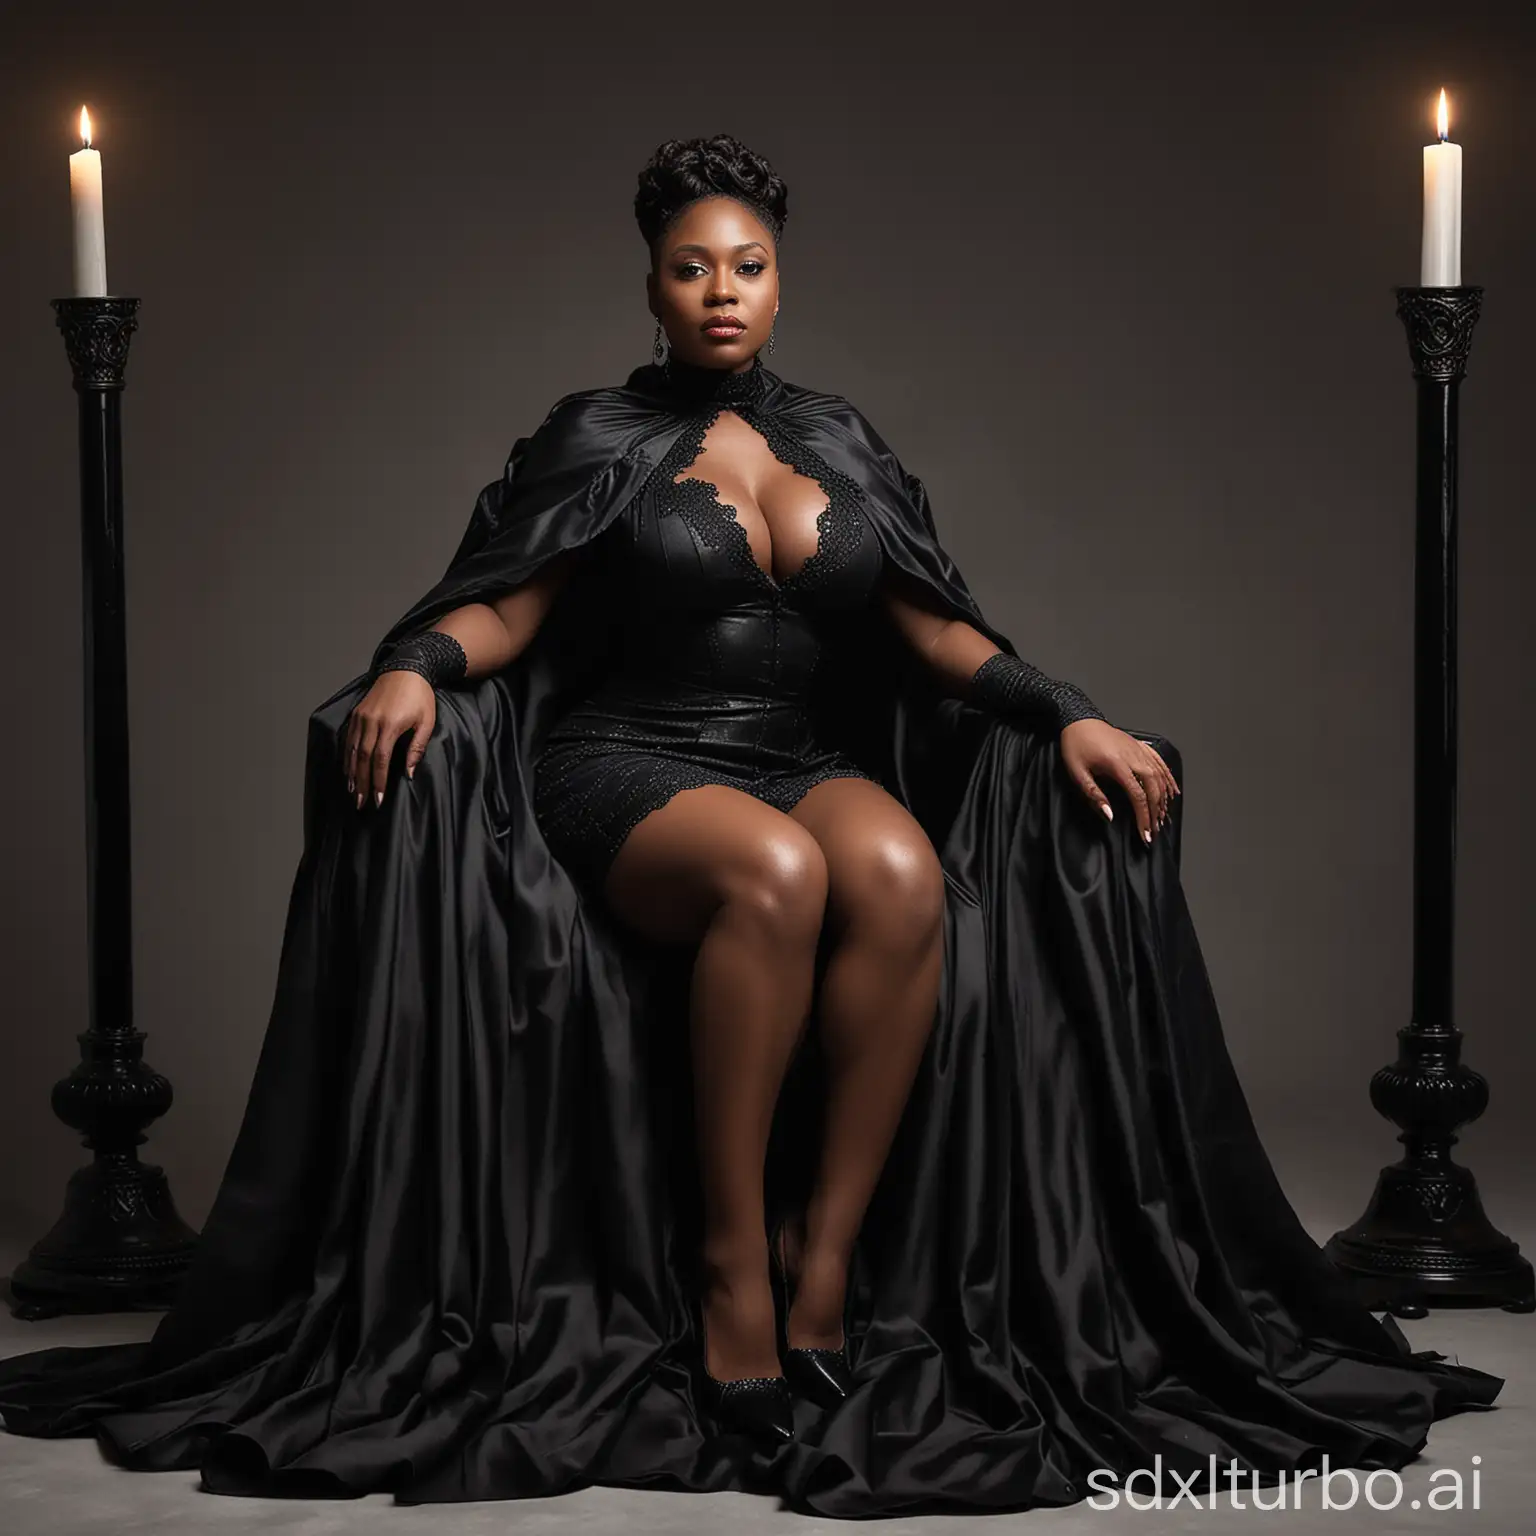 A stunning photograph of a powerful and majestic busty black woman sitting gracefully on a luxurious black throne. She exudes confidence and command, dressed in a mesmerizing black cape with a high collar, which drapes elegantly over her shoulders. Her sophisticated attire shows her exquisite taste and imposing presence. High heel shoes add a sensual touch to the scene, enhancing its balance and grace. A single candlestick adorned with black candles stands proudly beside her, casting a warm, inviting glow that envelopes the scene with an air of mystery and strength. This captivating image is a bold statement of power, confidence and beauty, leaving a lasting impression on all who behold it.,